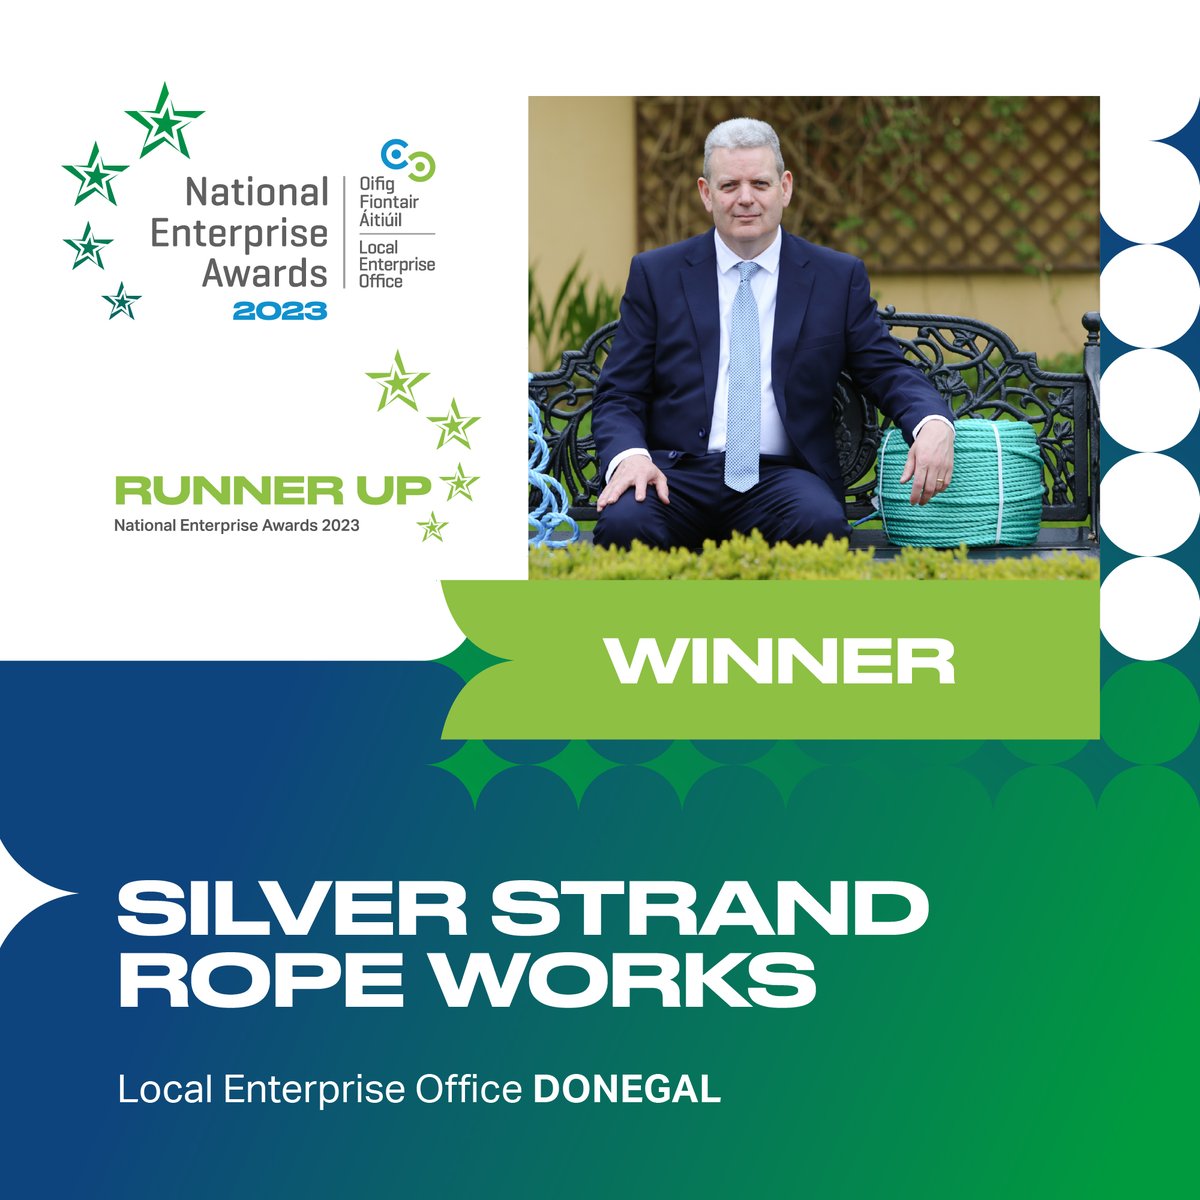 The regional winner for North West is Silver Strand Ropeworks supported by @DonegalLEO #NEAwards #MakingItHappen